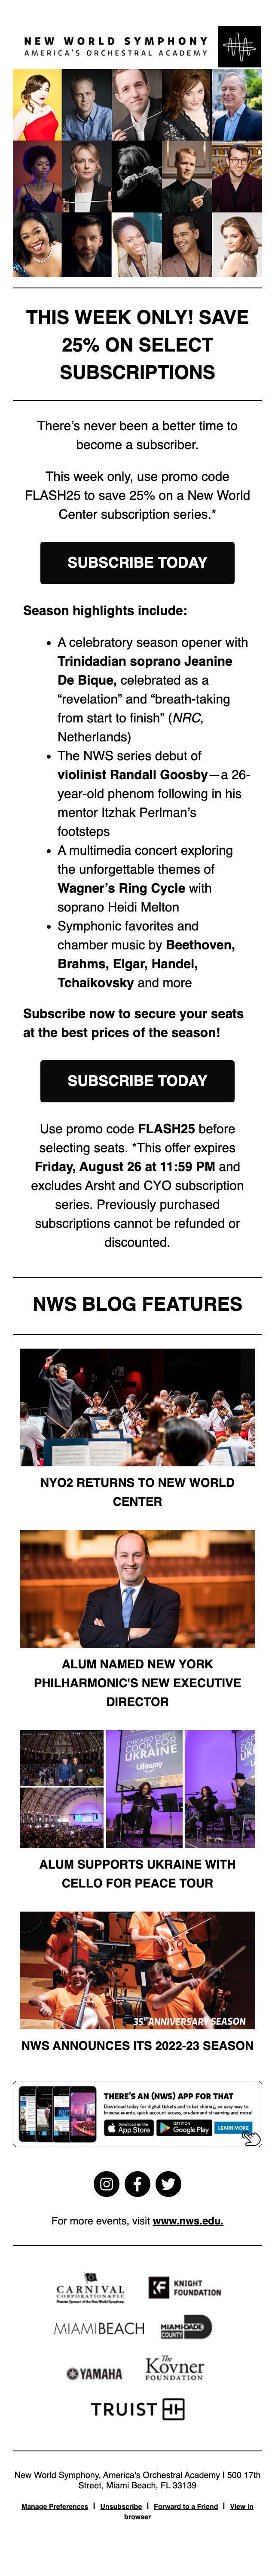 This Week at NWS: Save 25% on Select Subscriptions - mobile view